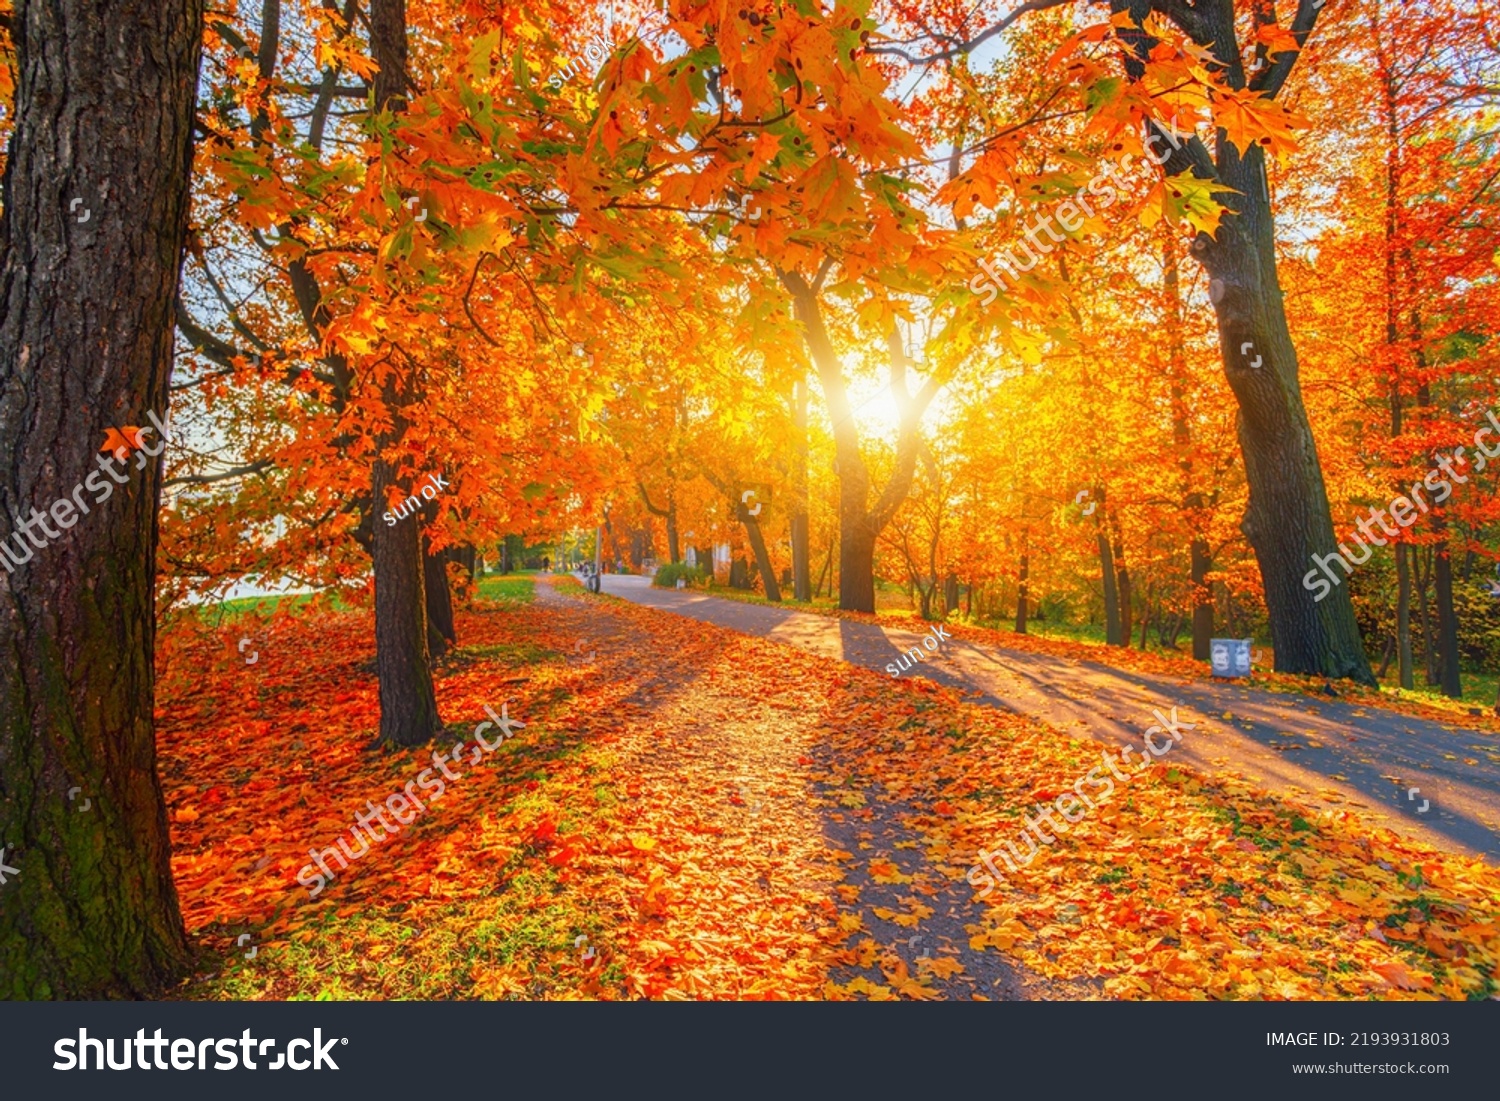 Autumn forest path. Orange color tree, red brown maple leaves in fall city park. Nature scene in sunset fog Wood bench in scenic scenery Bright light sun Sunrise of a sunny day, morning sunlight view. #2193931803